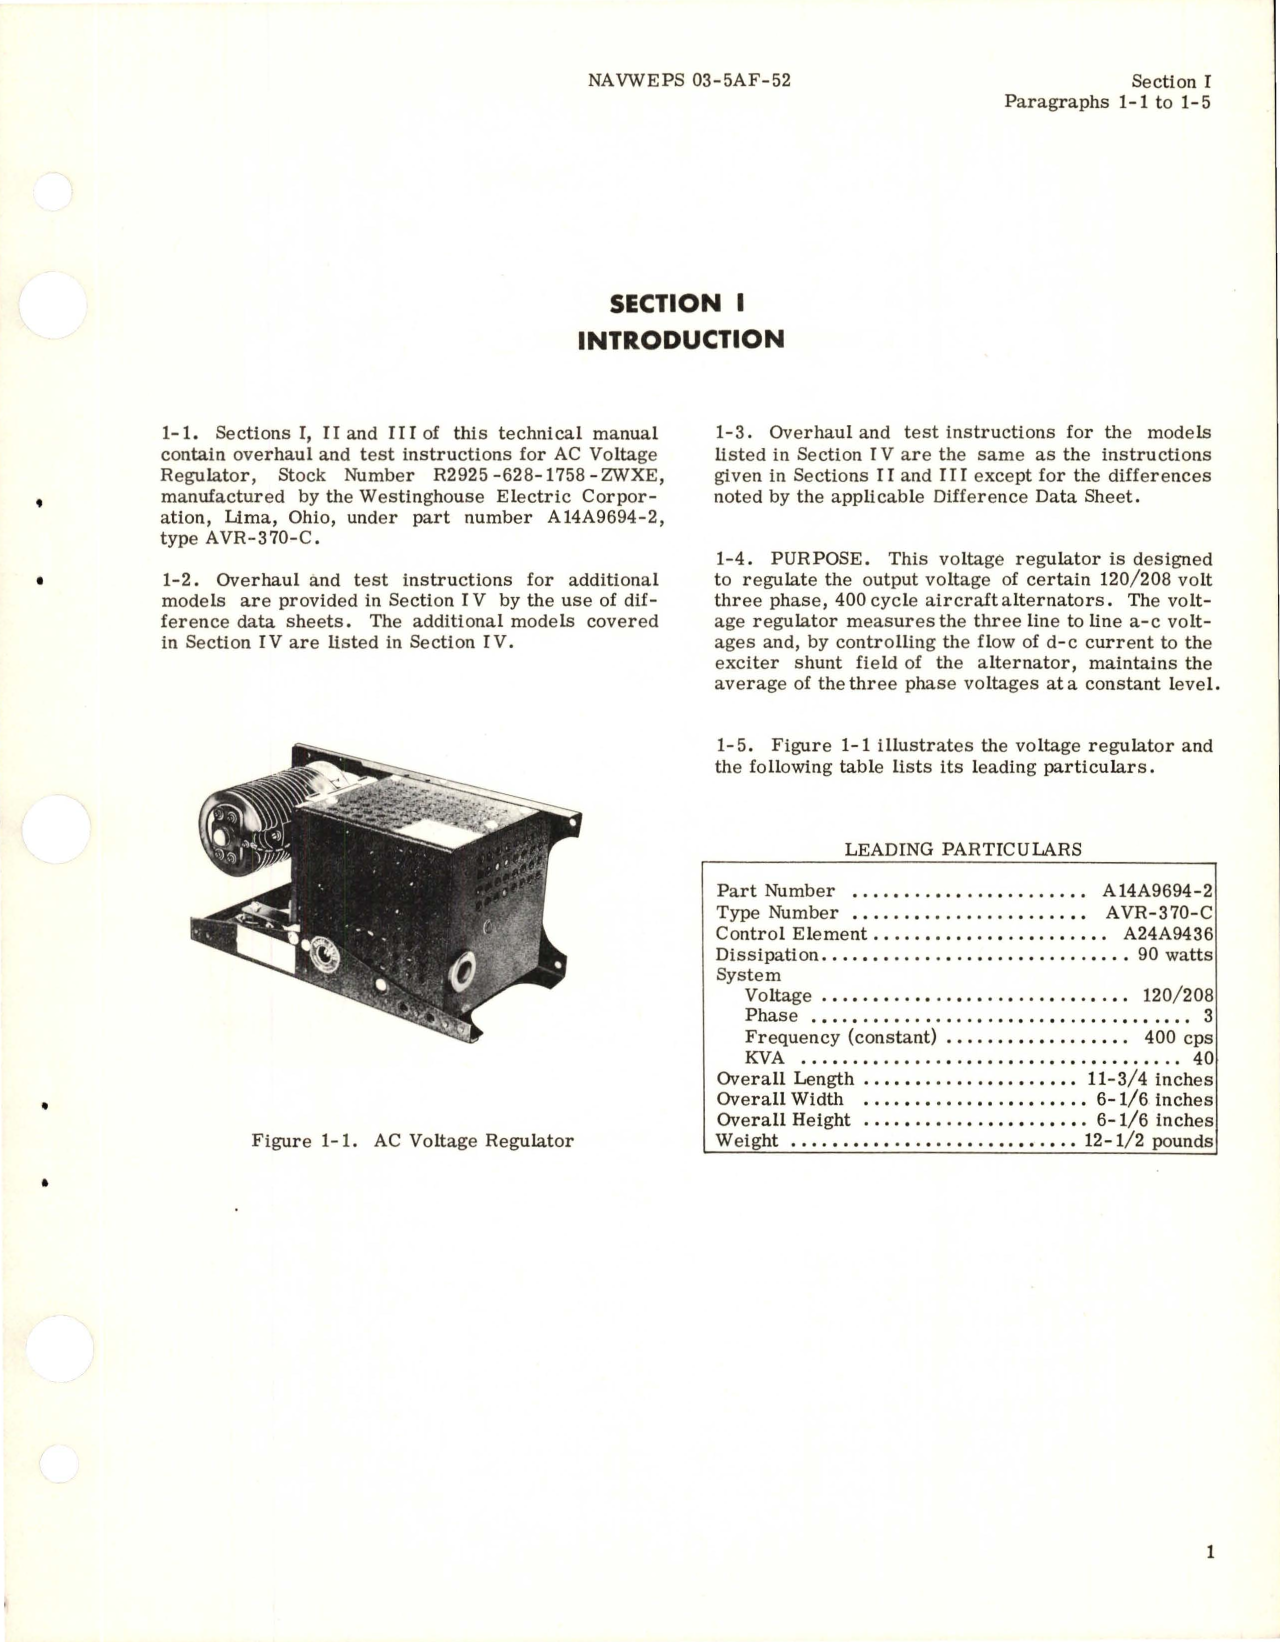 Sample page 5 from AirCorps Library document: Overhaul Instructions for AC Voltage Regulator - Part A14A9694-2 